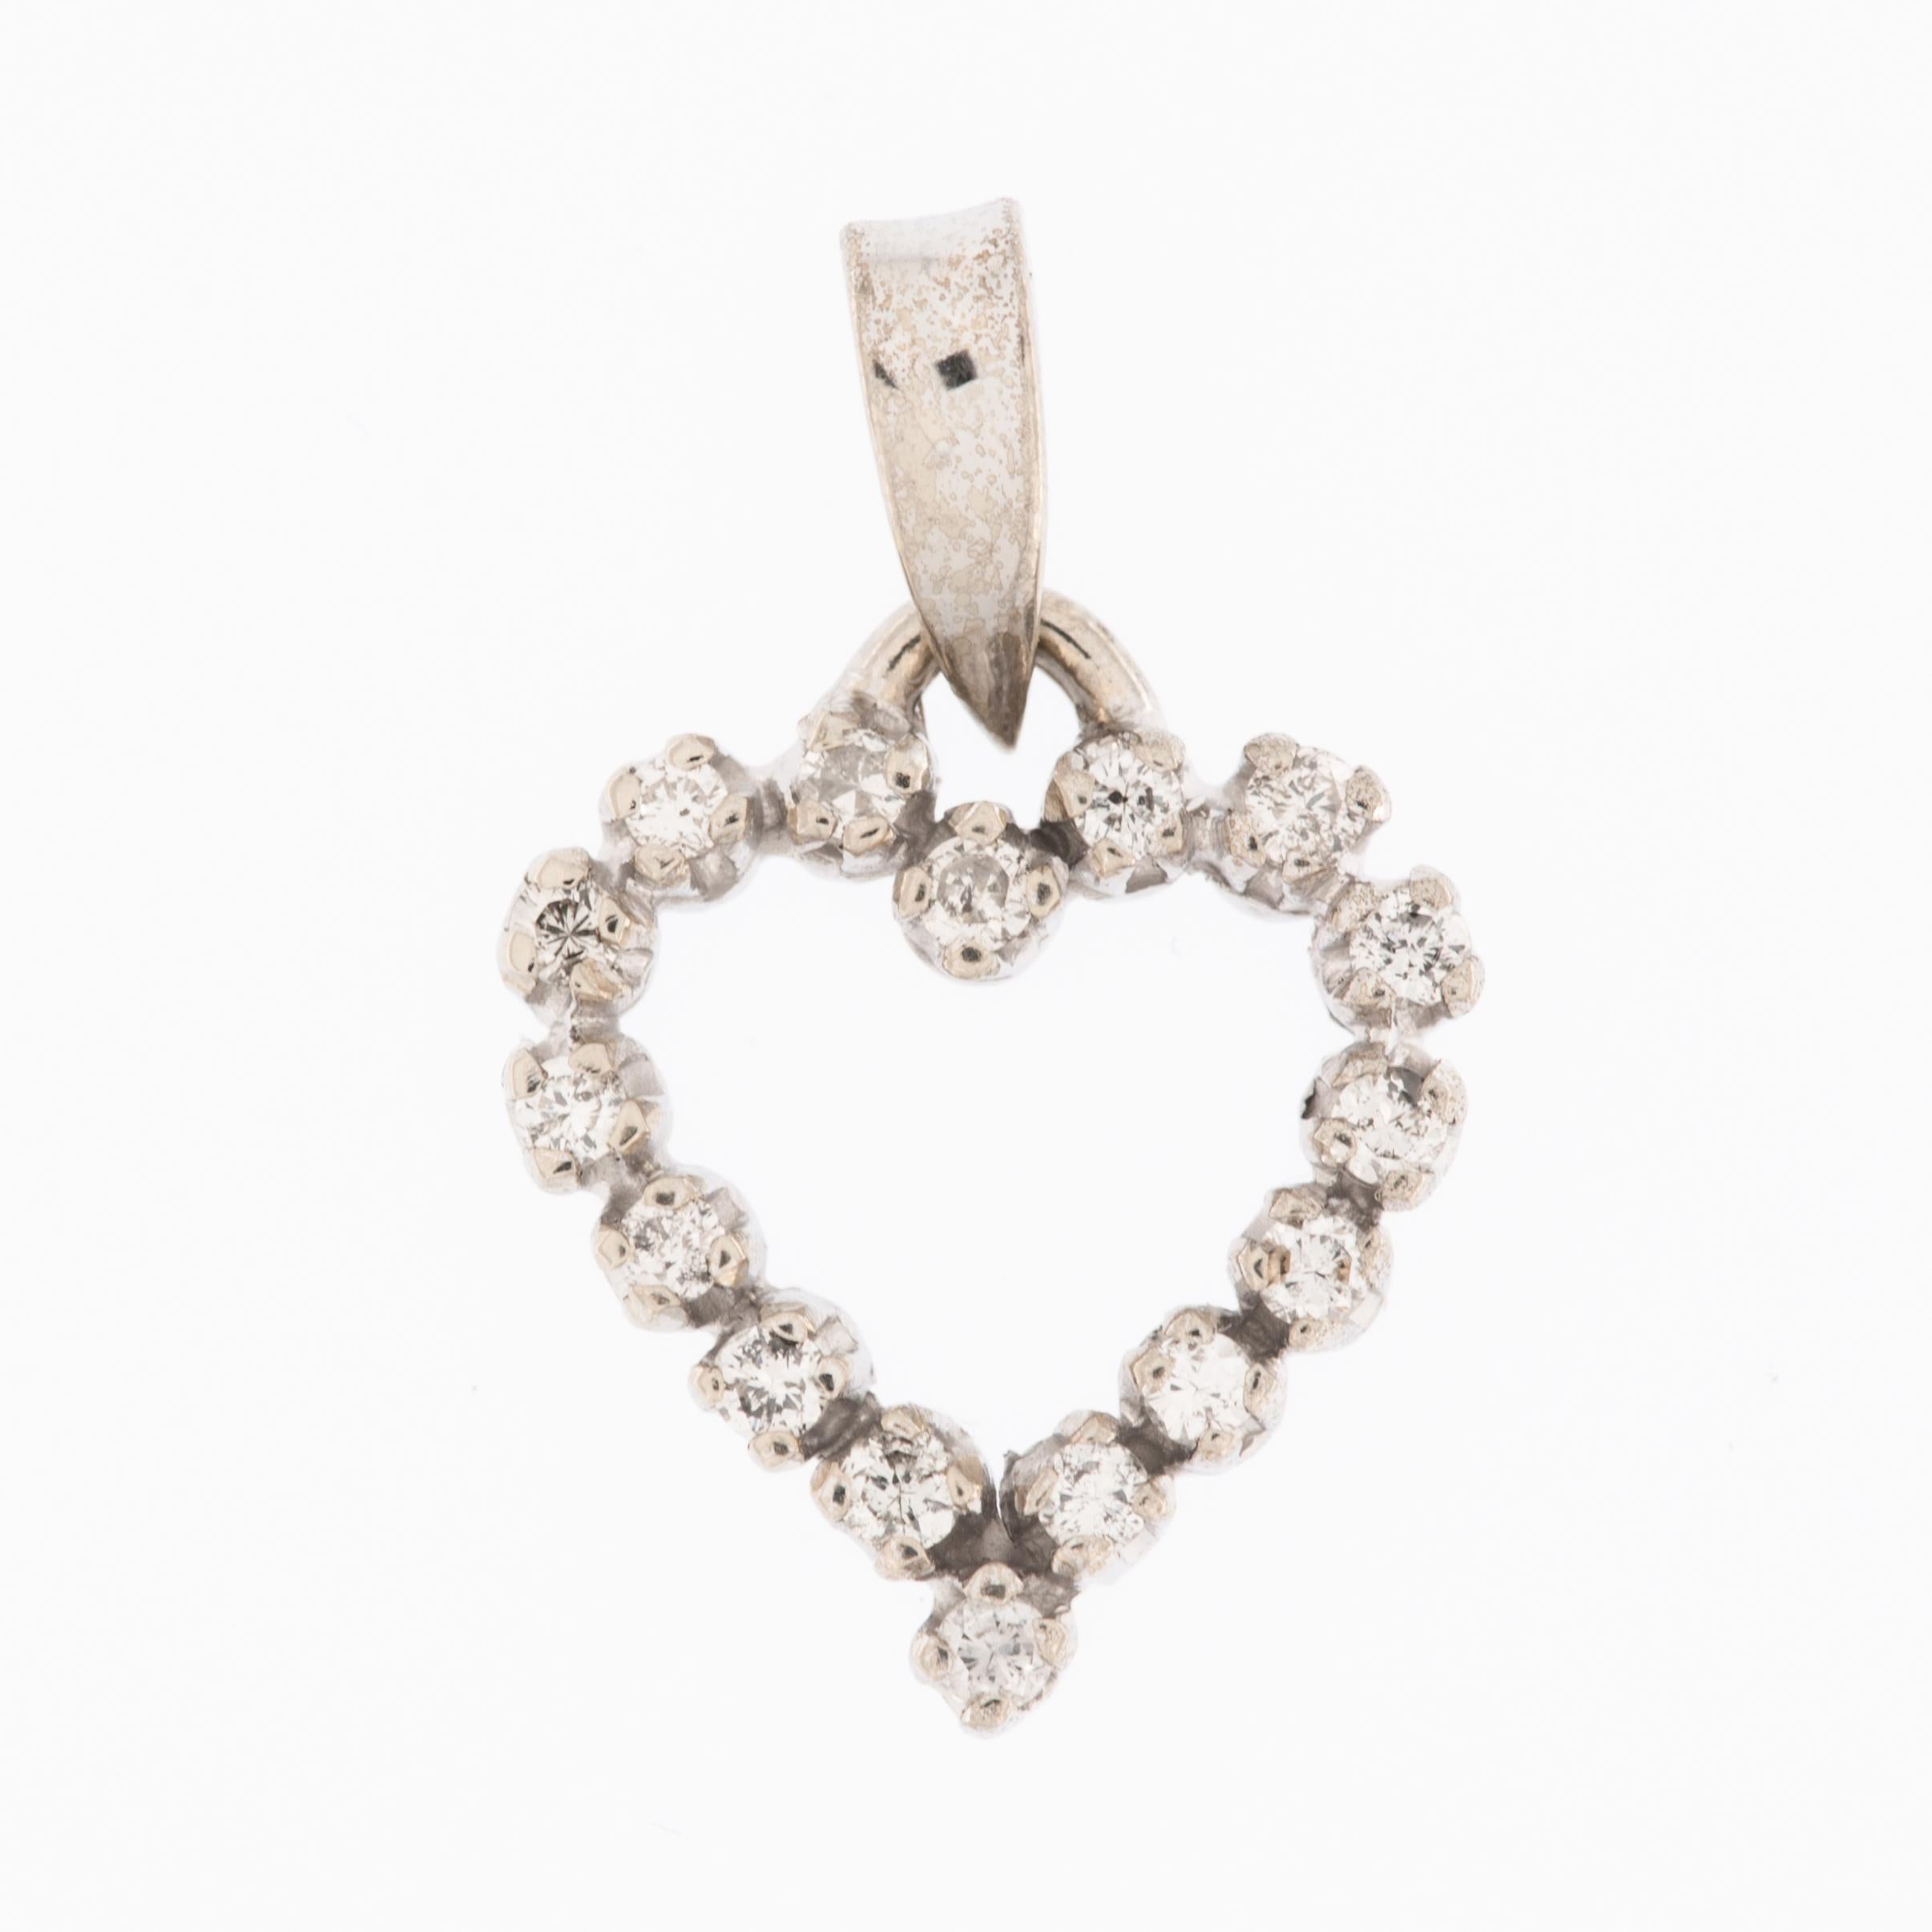 This stunning Diamonds Heart Pendant is a testament to both sophistication and timeless elegance. Crafted from luxurious 18 karat white gold, the pendant showcases a flawless combination of purity and opulence. The white gold provides a sleek and